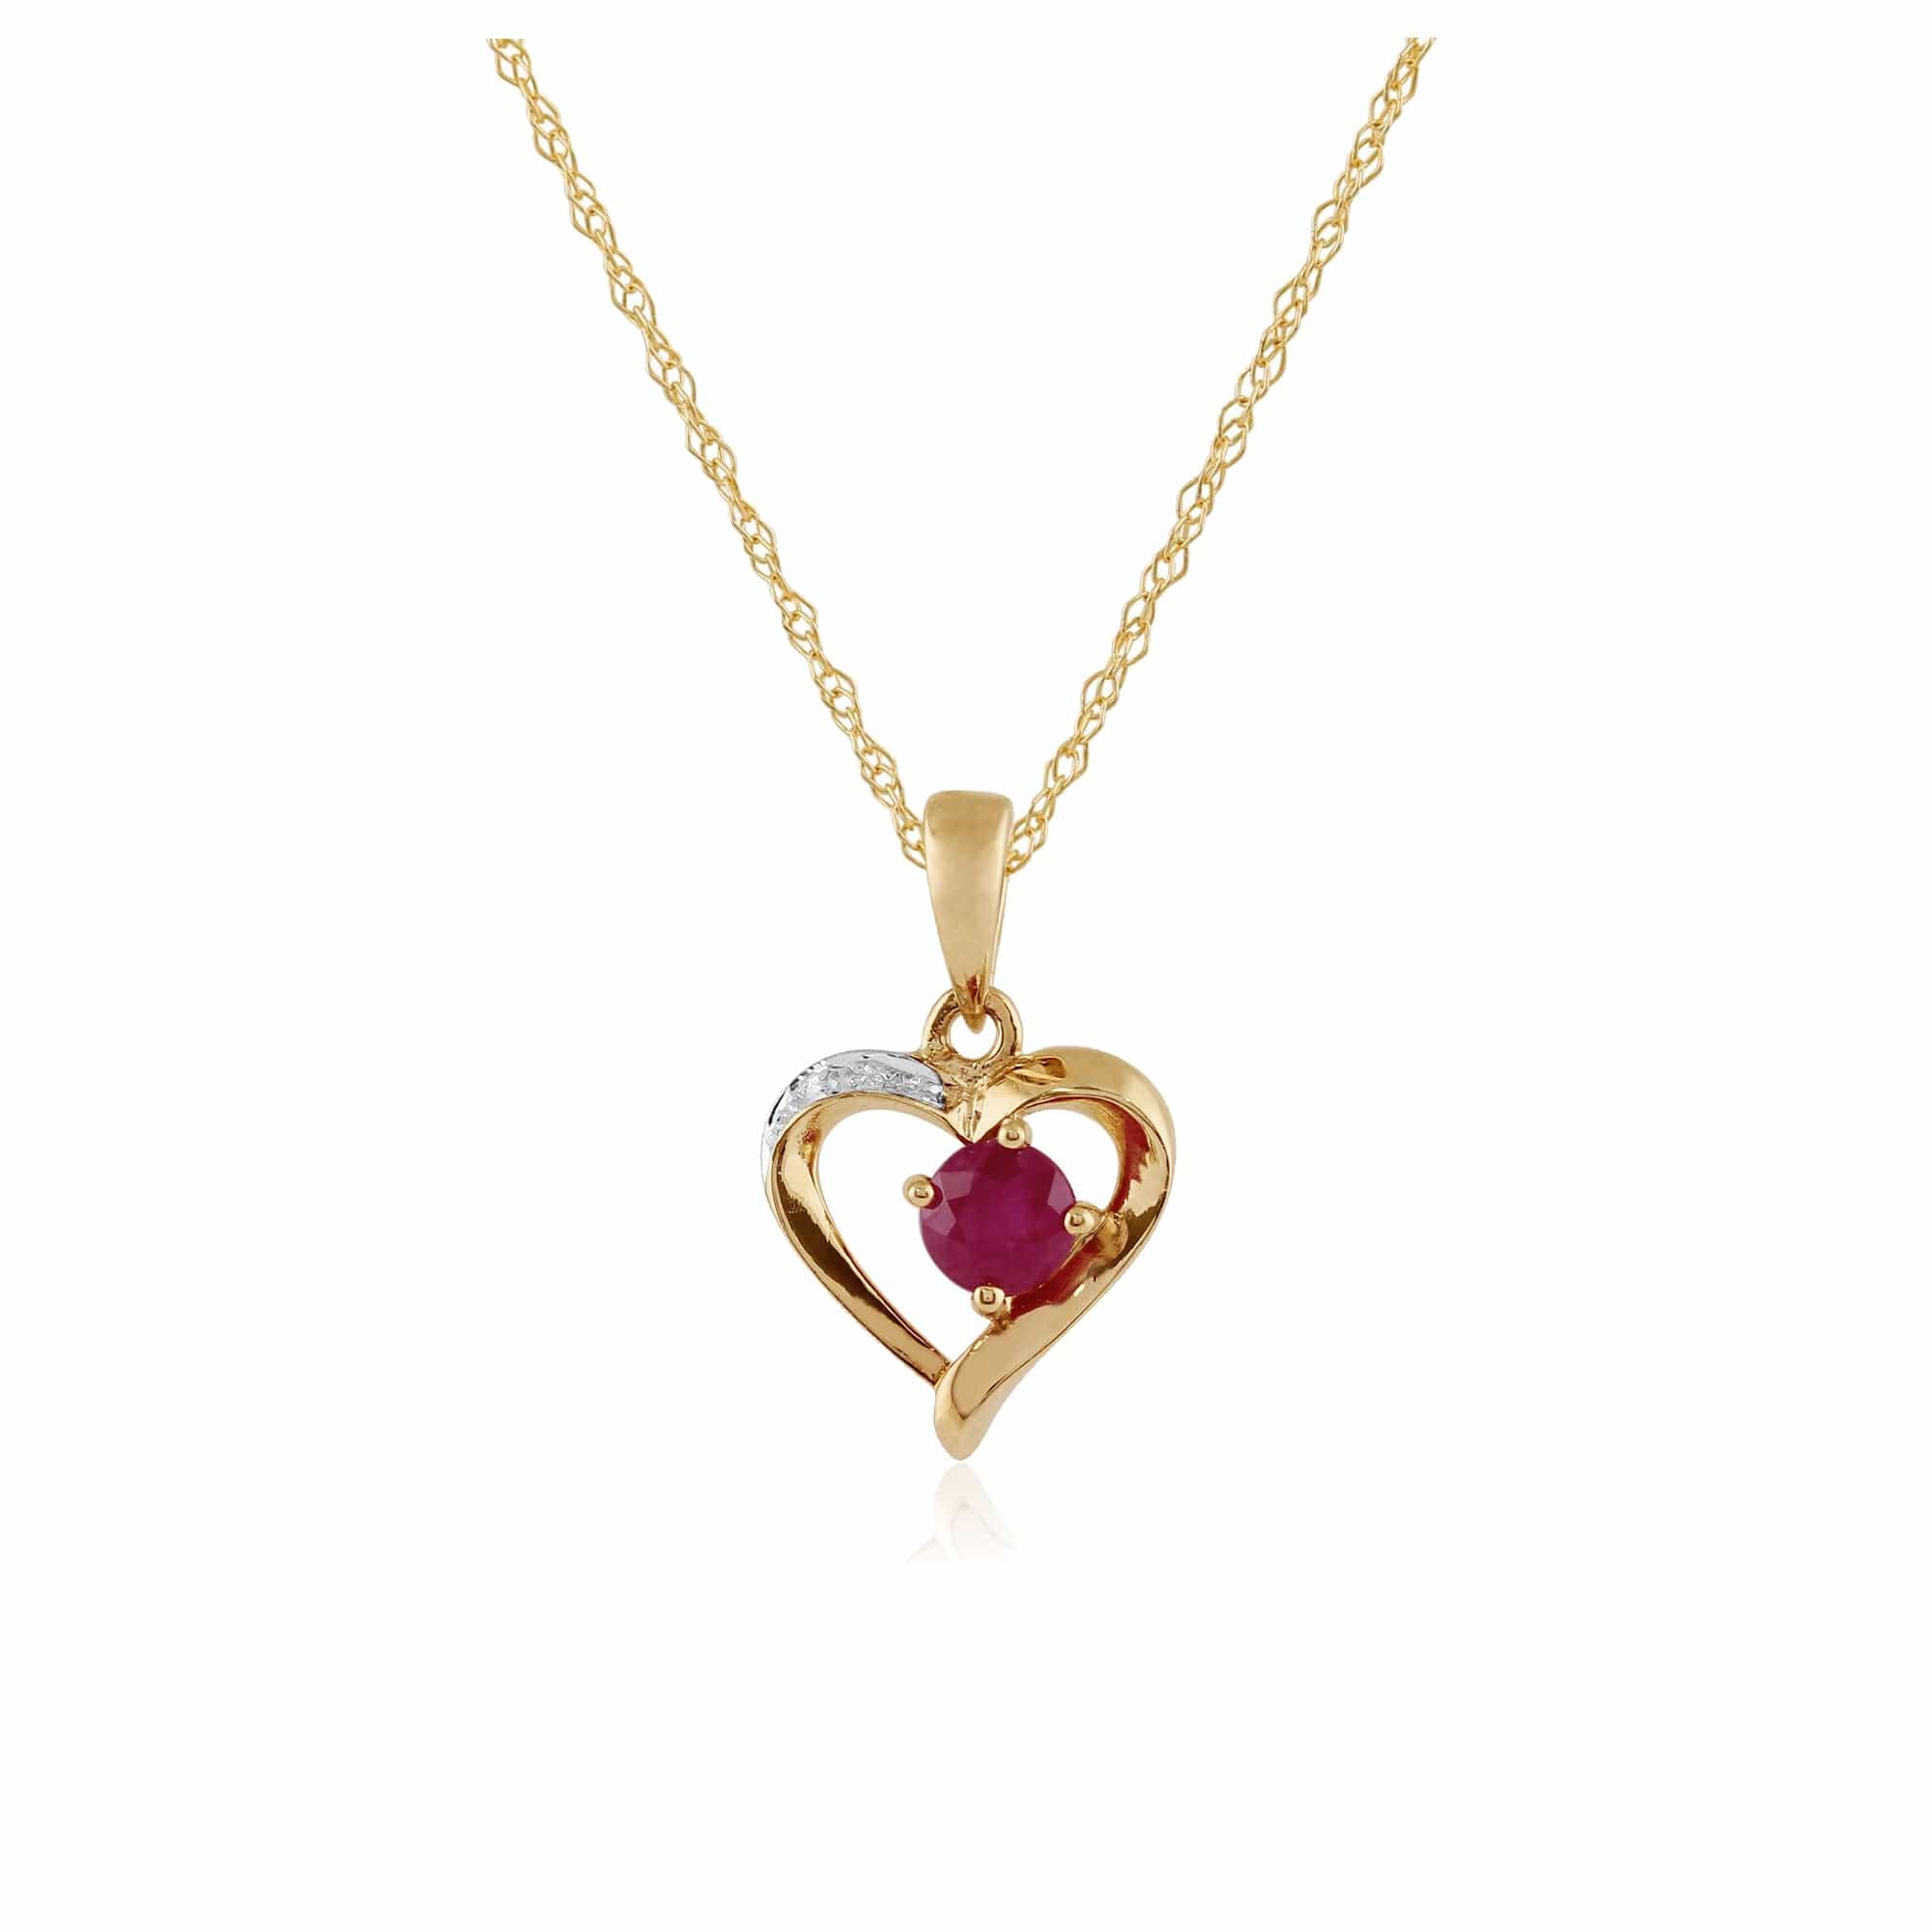 Photos - Pendant / Choker Necklace Classic Round Ruby & Diamond Heart Pendant in 9ct Yellow Gold